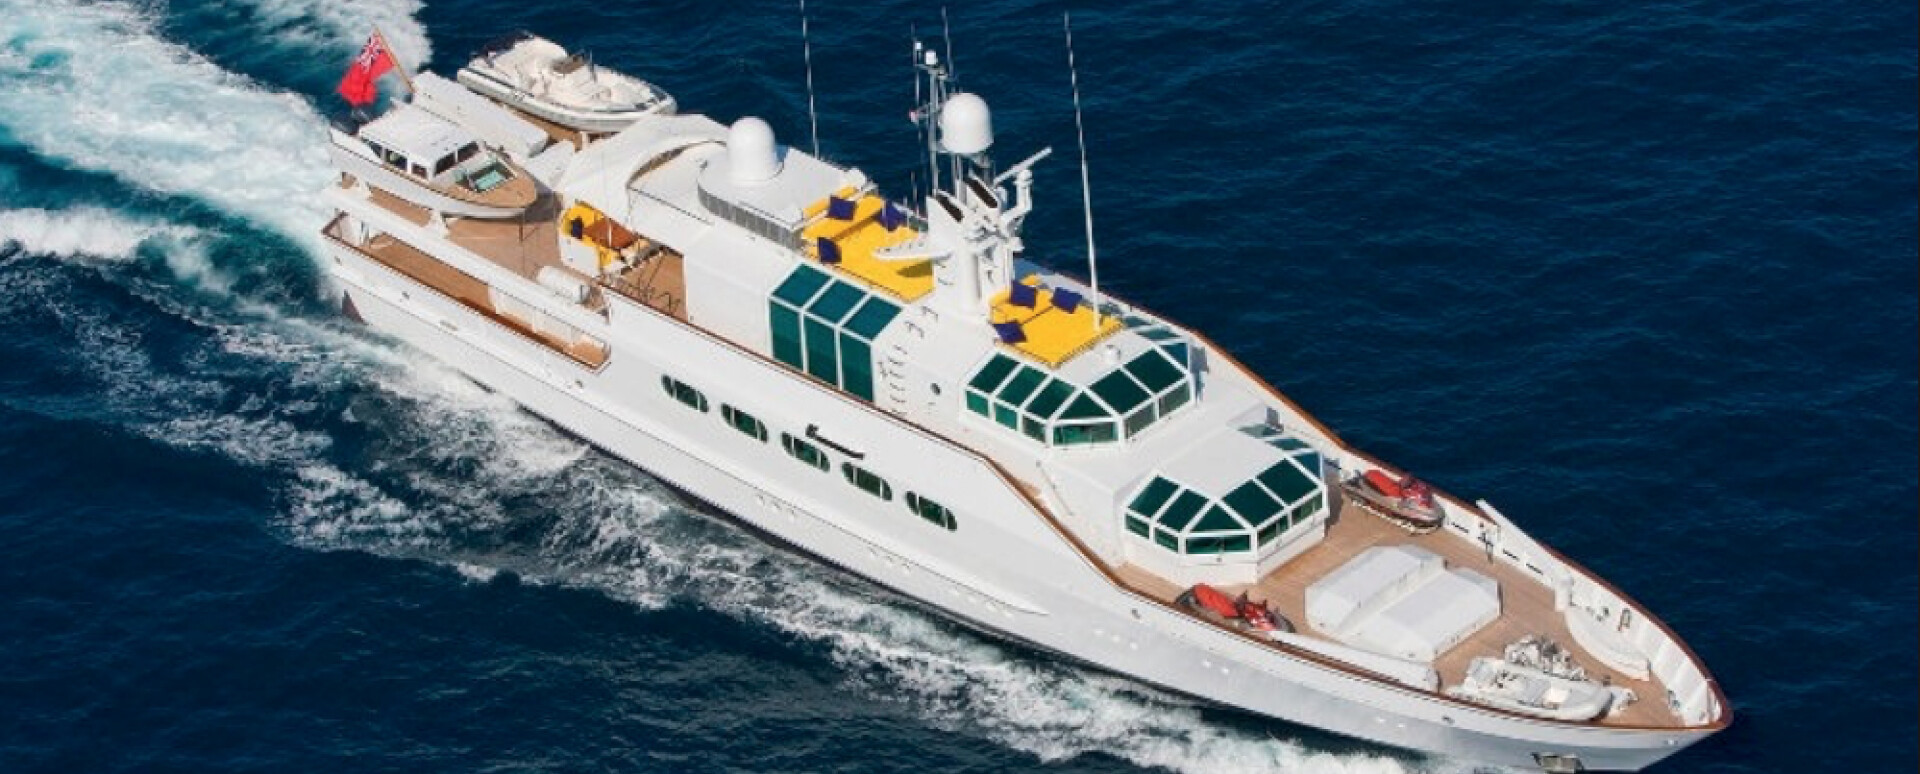                                                                                                     Iconic Feadship M/Y Azteca for Sale
                                                                                            